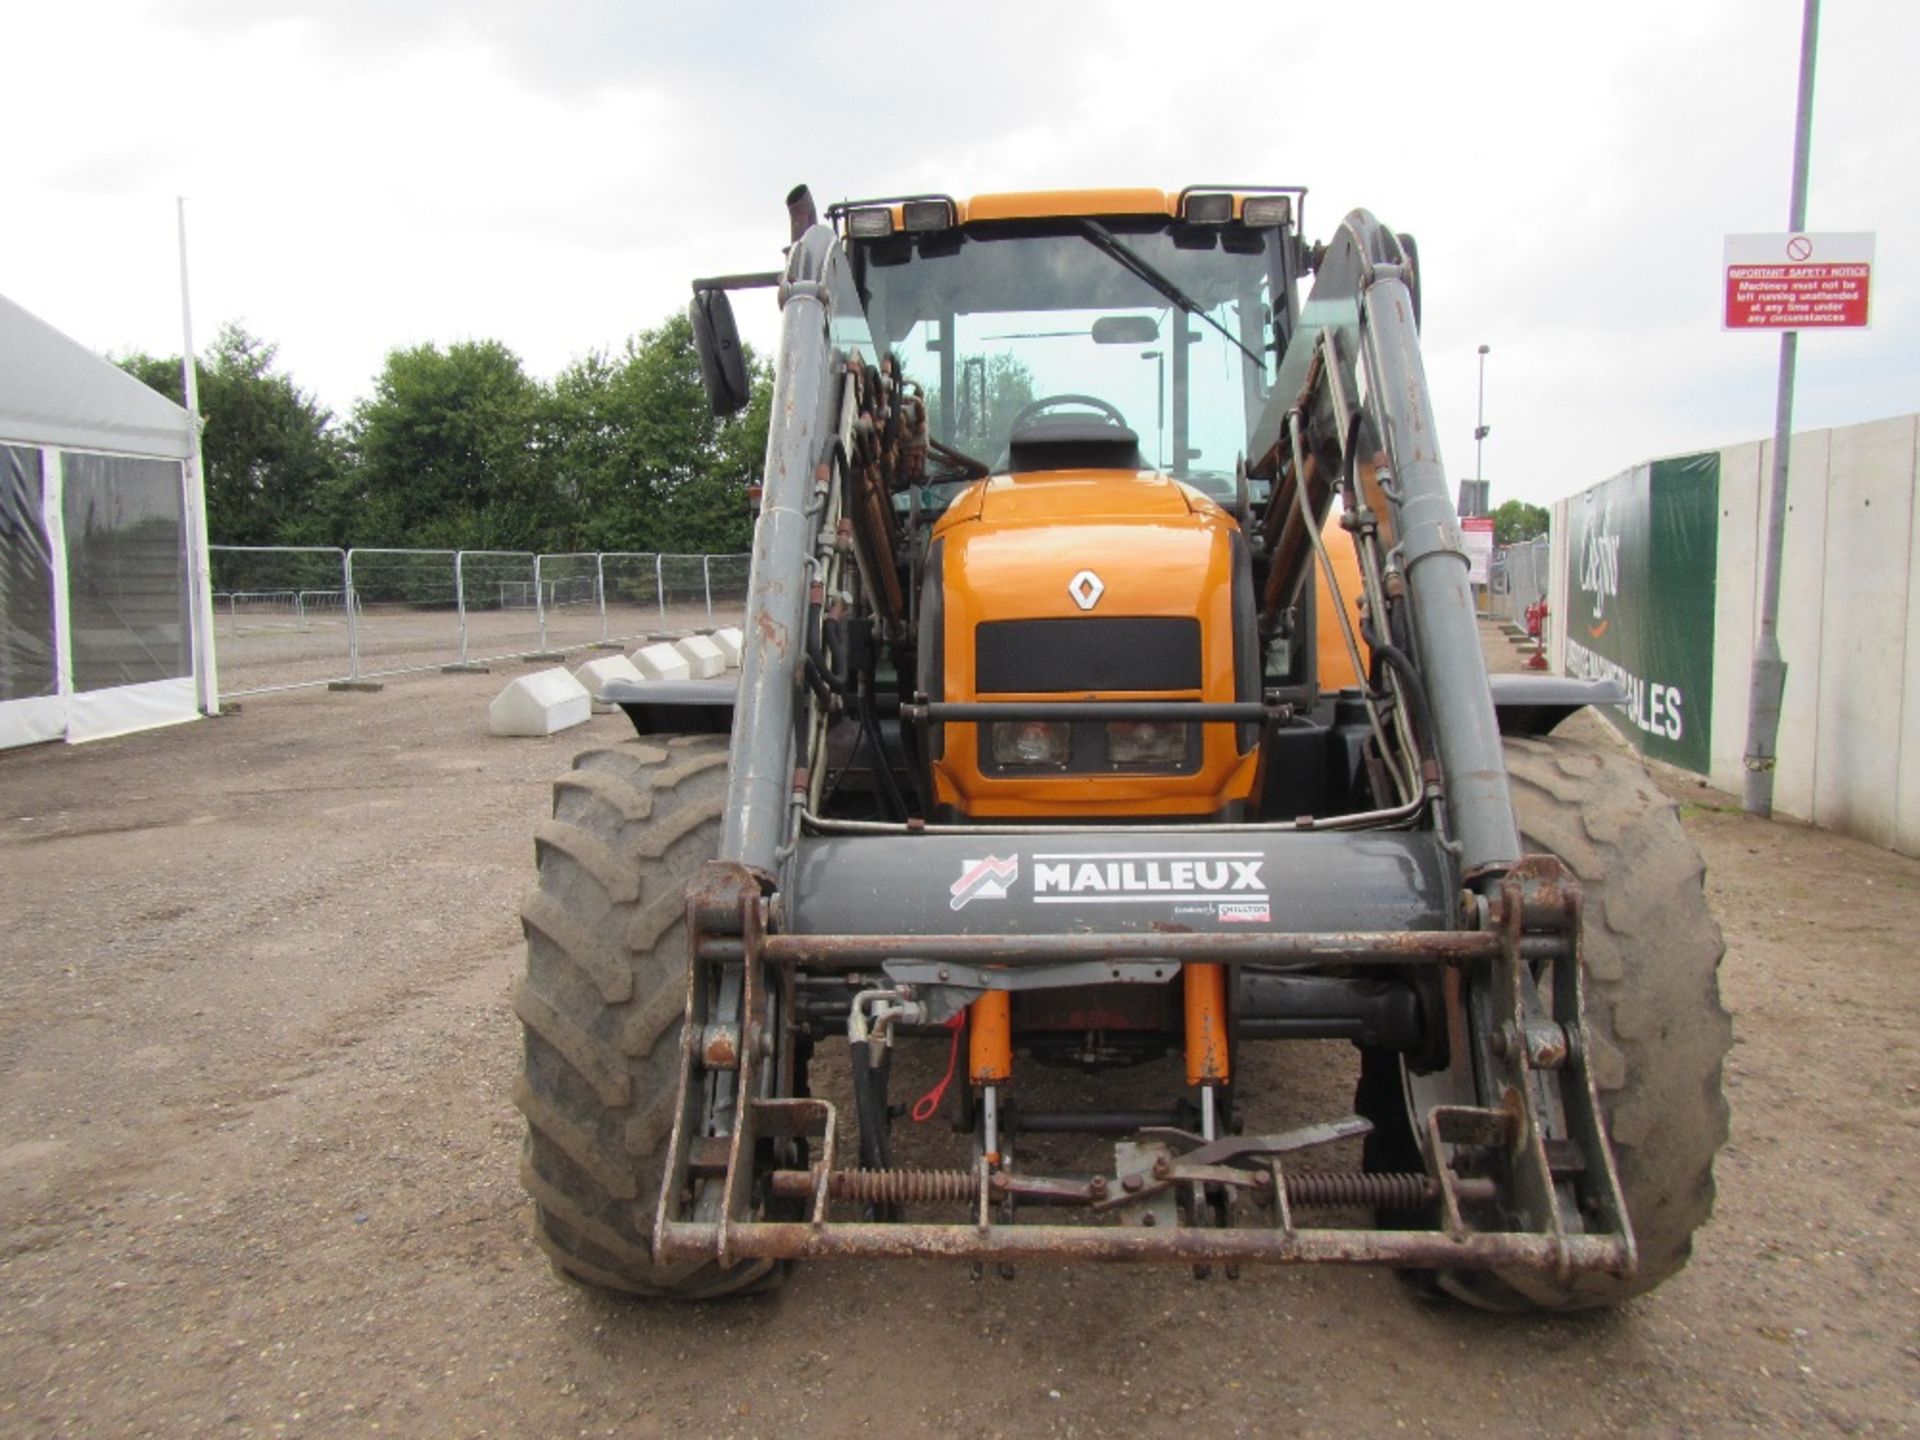 Renault Ares 815 RZ Tractor with Chilton MX120 Loader & Cab Suspension. Reg. No. SV51 ETL - Image 2 of 16